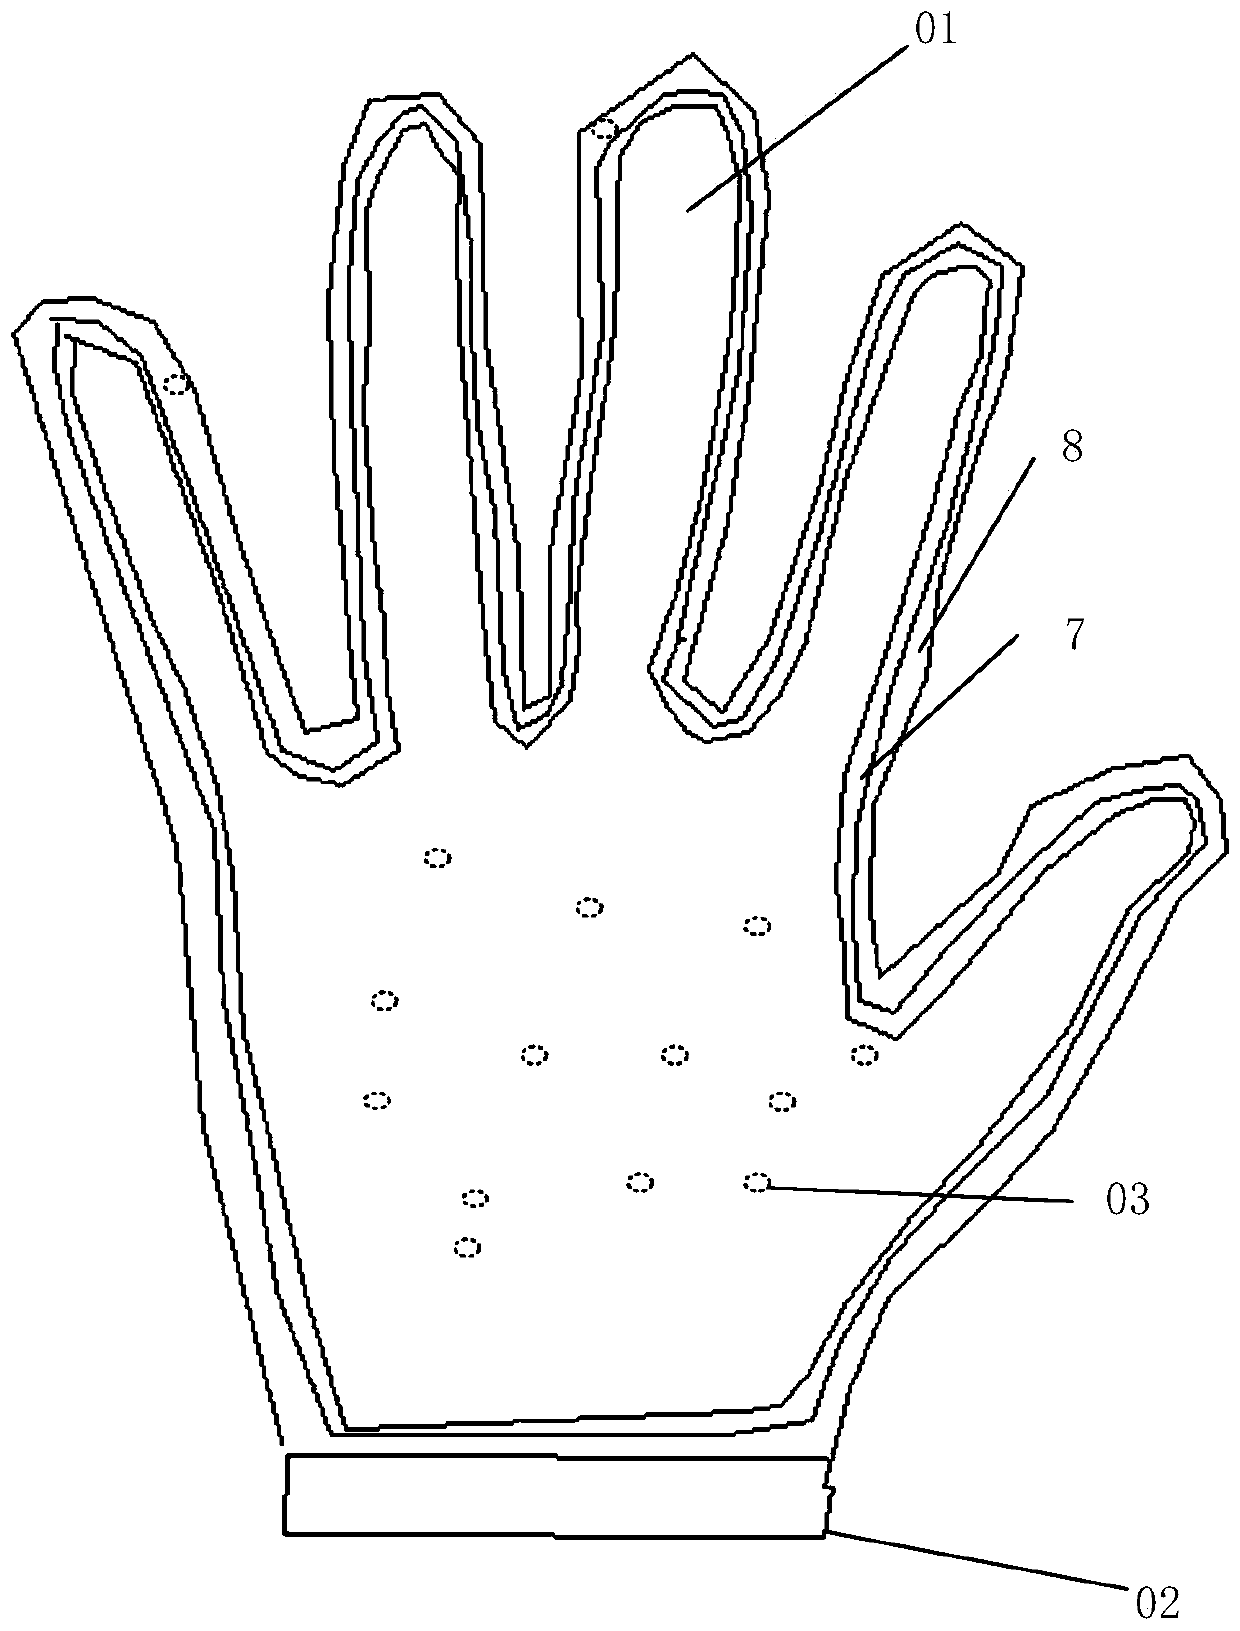 EMS physiotherapy glove